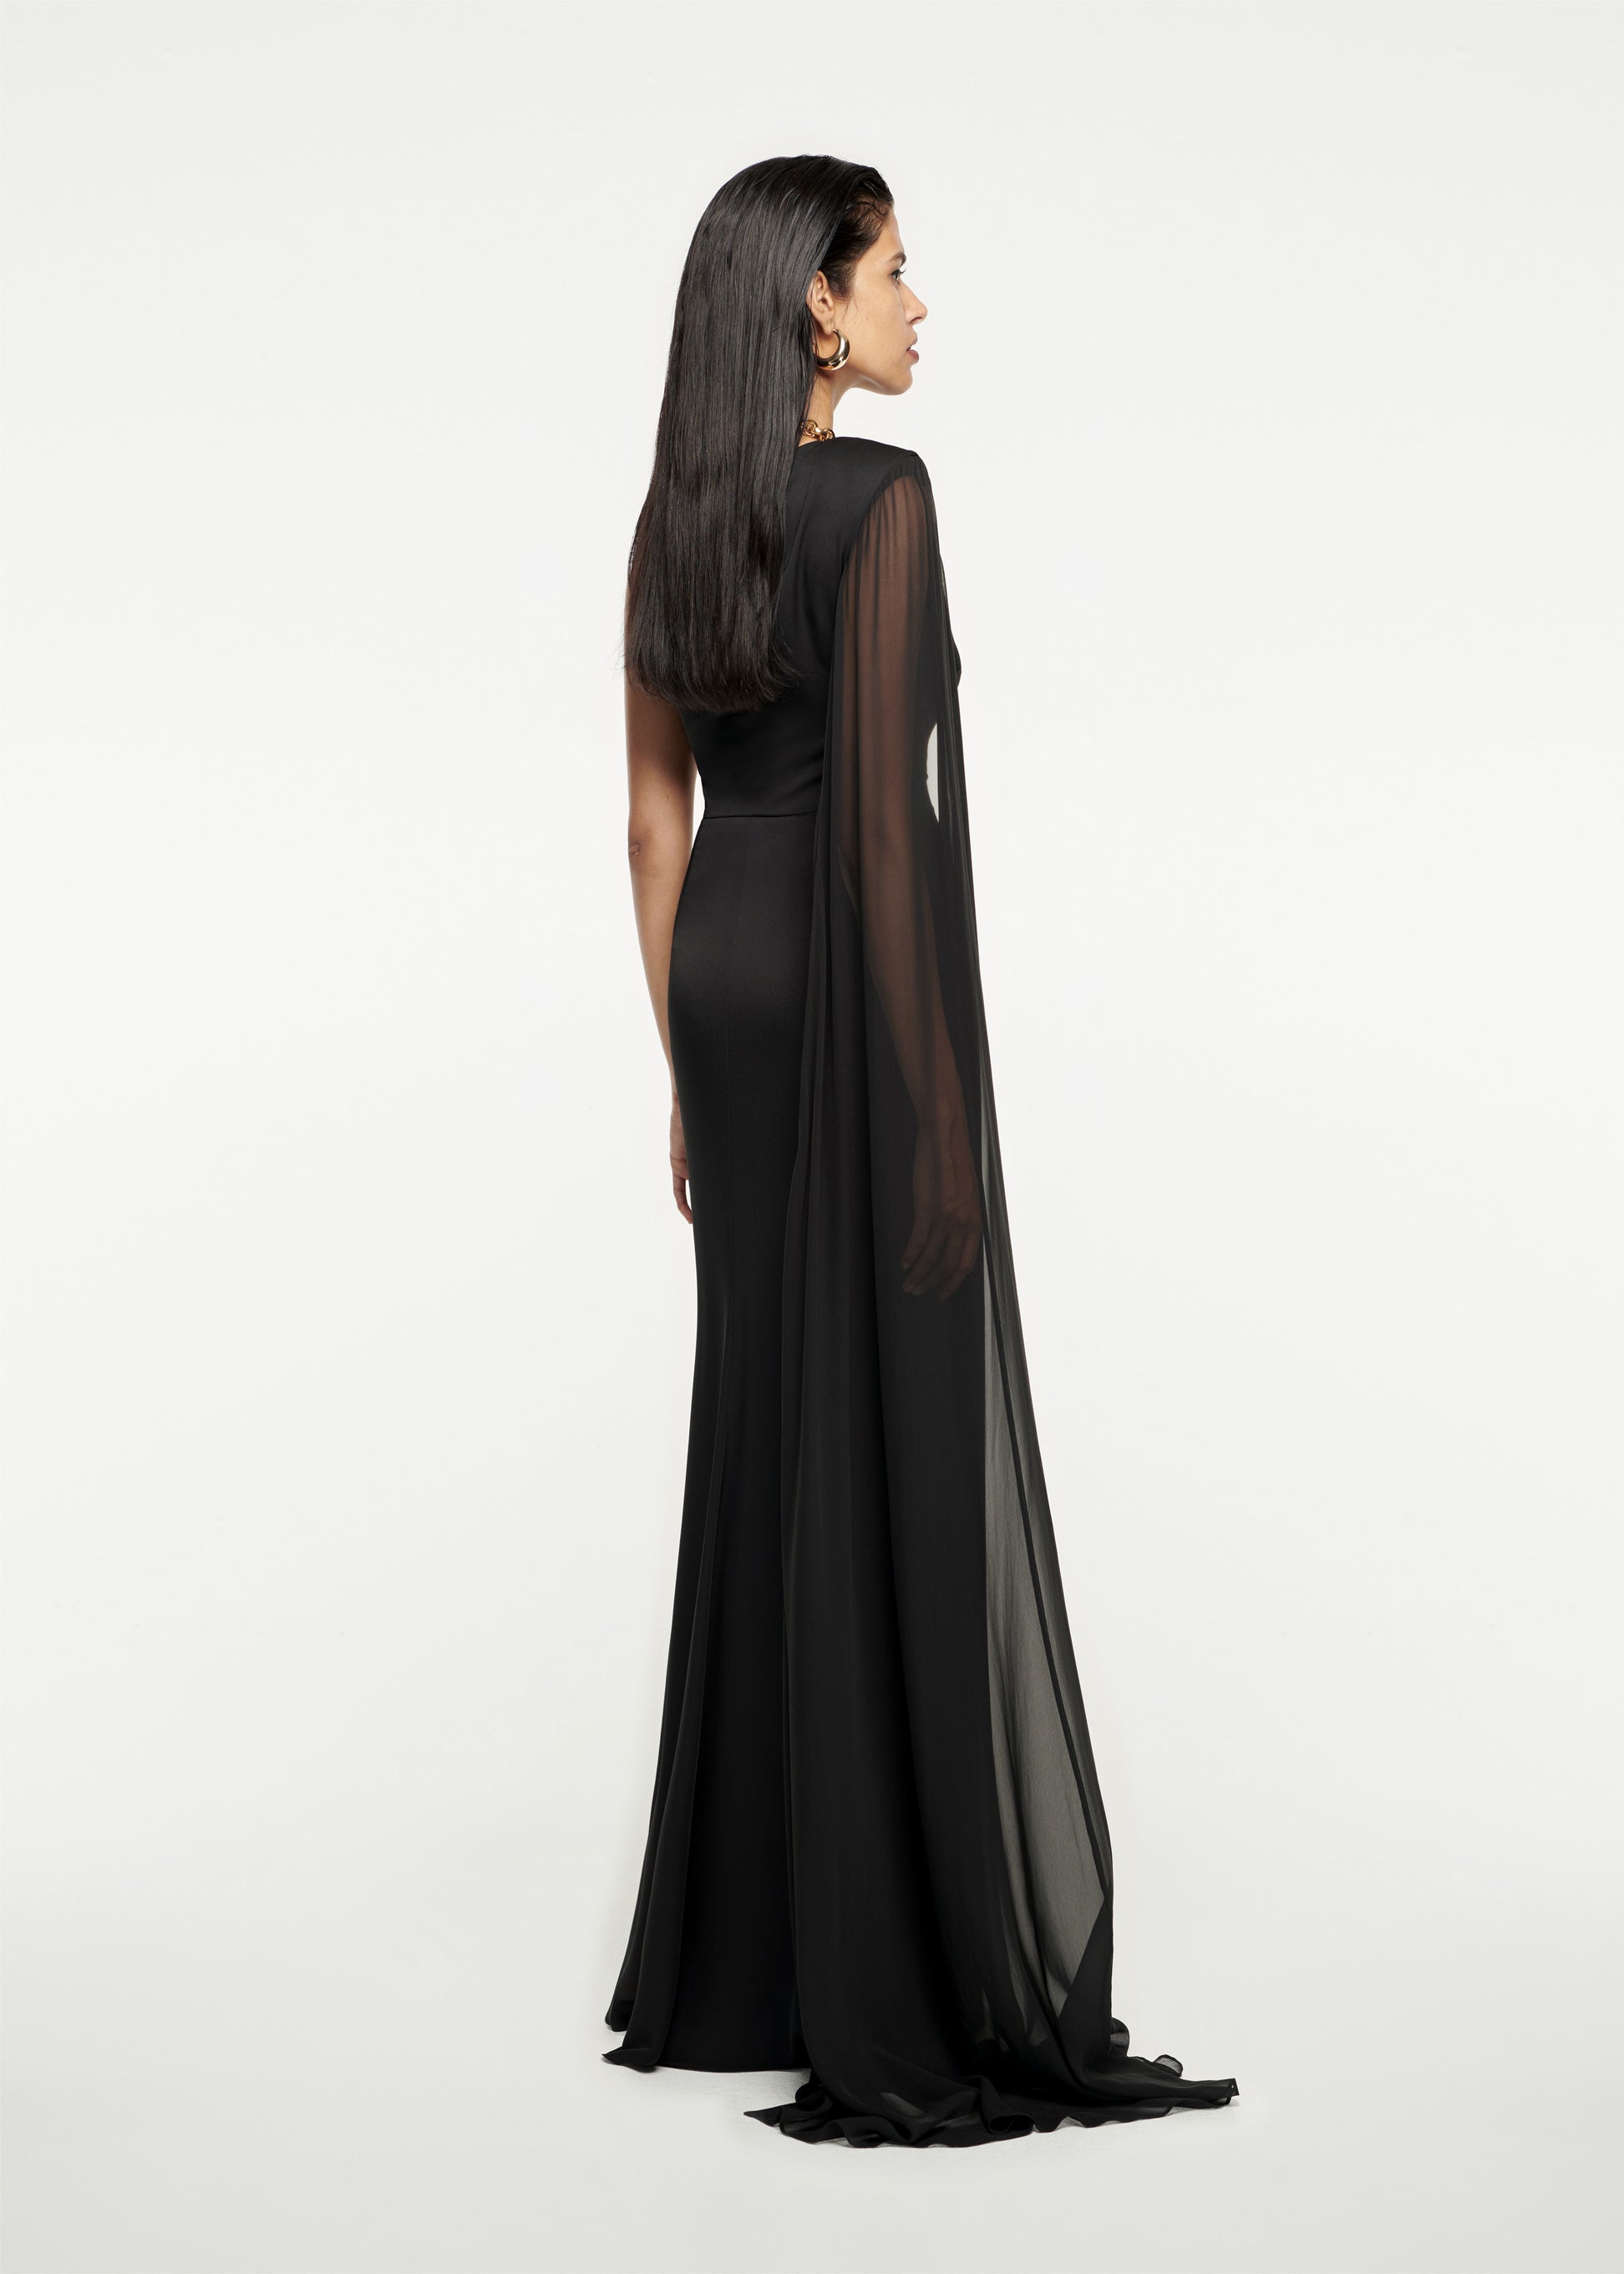 The back of a woman wearing the Asymmetric Stretch Silk Crepe Gown in Black